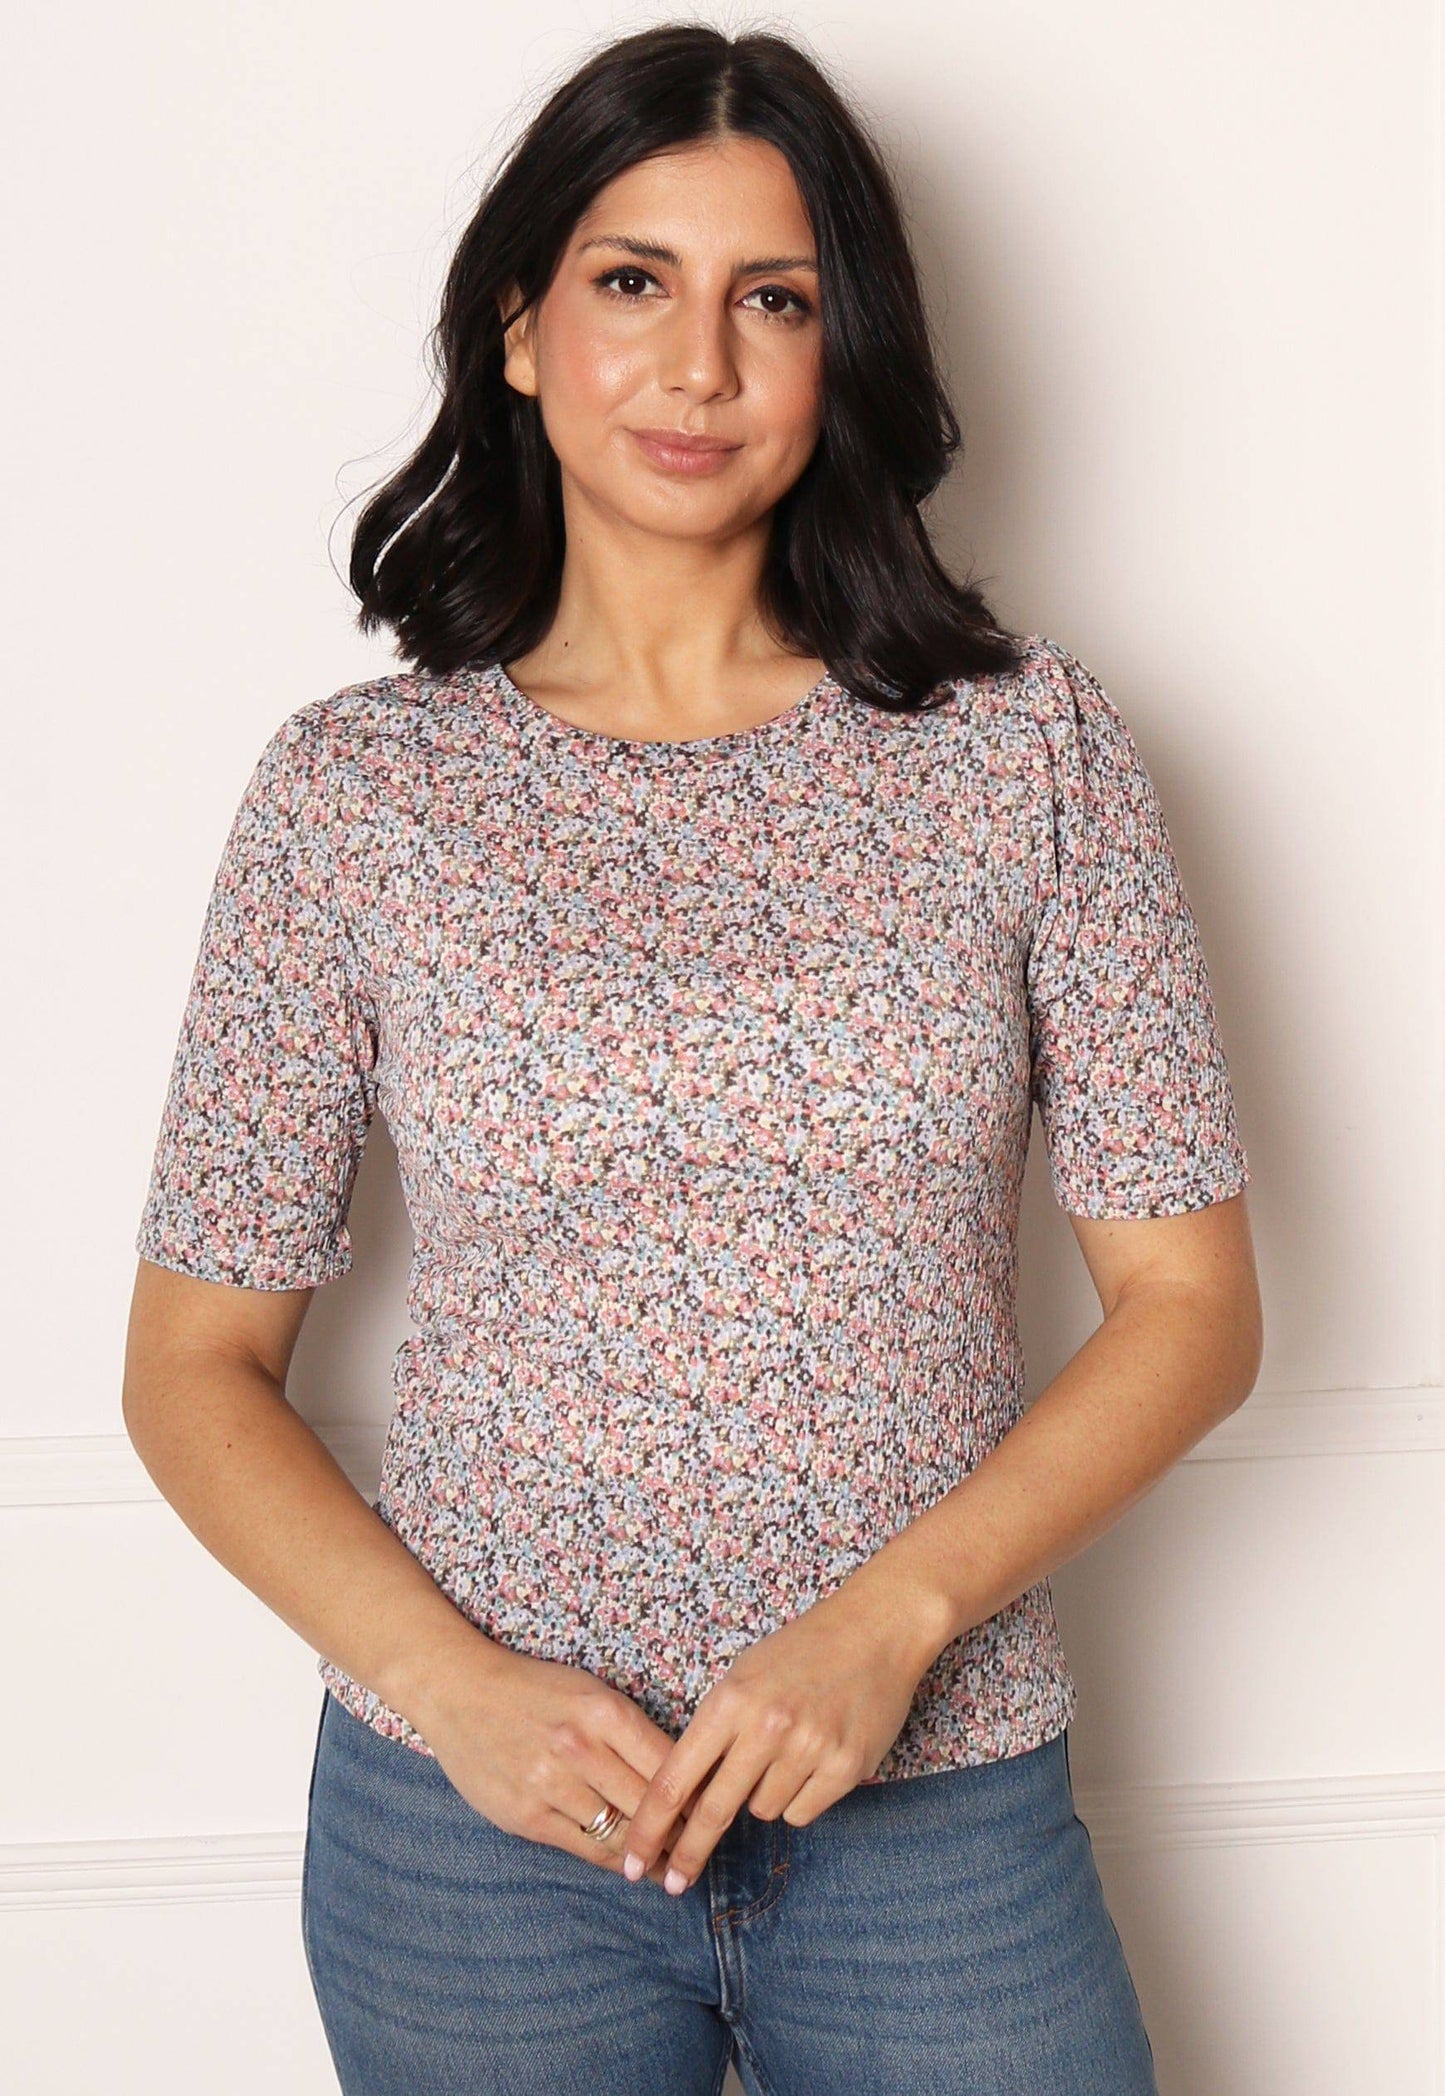 ONLY Pella Ditsy Floral Short Sleeve Top in Pink Tones - One Nation Clothing